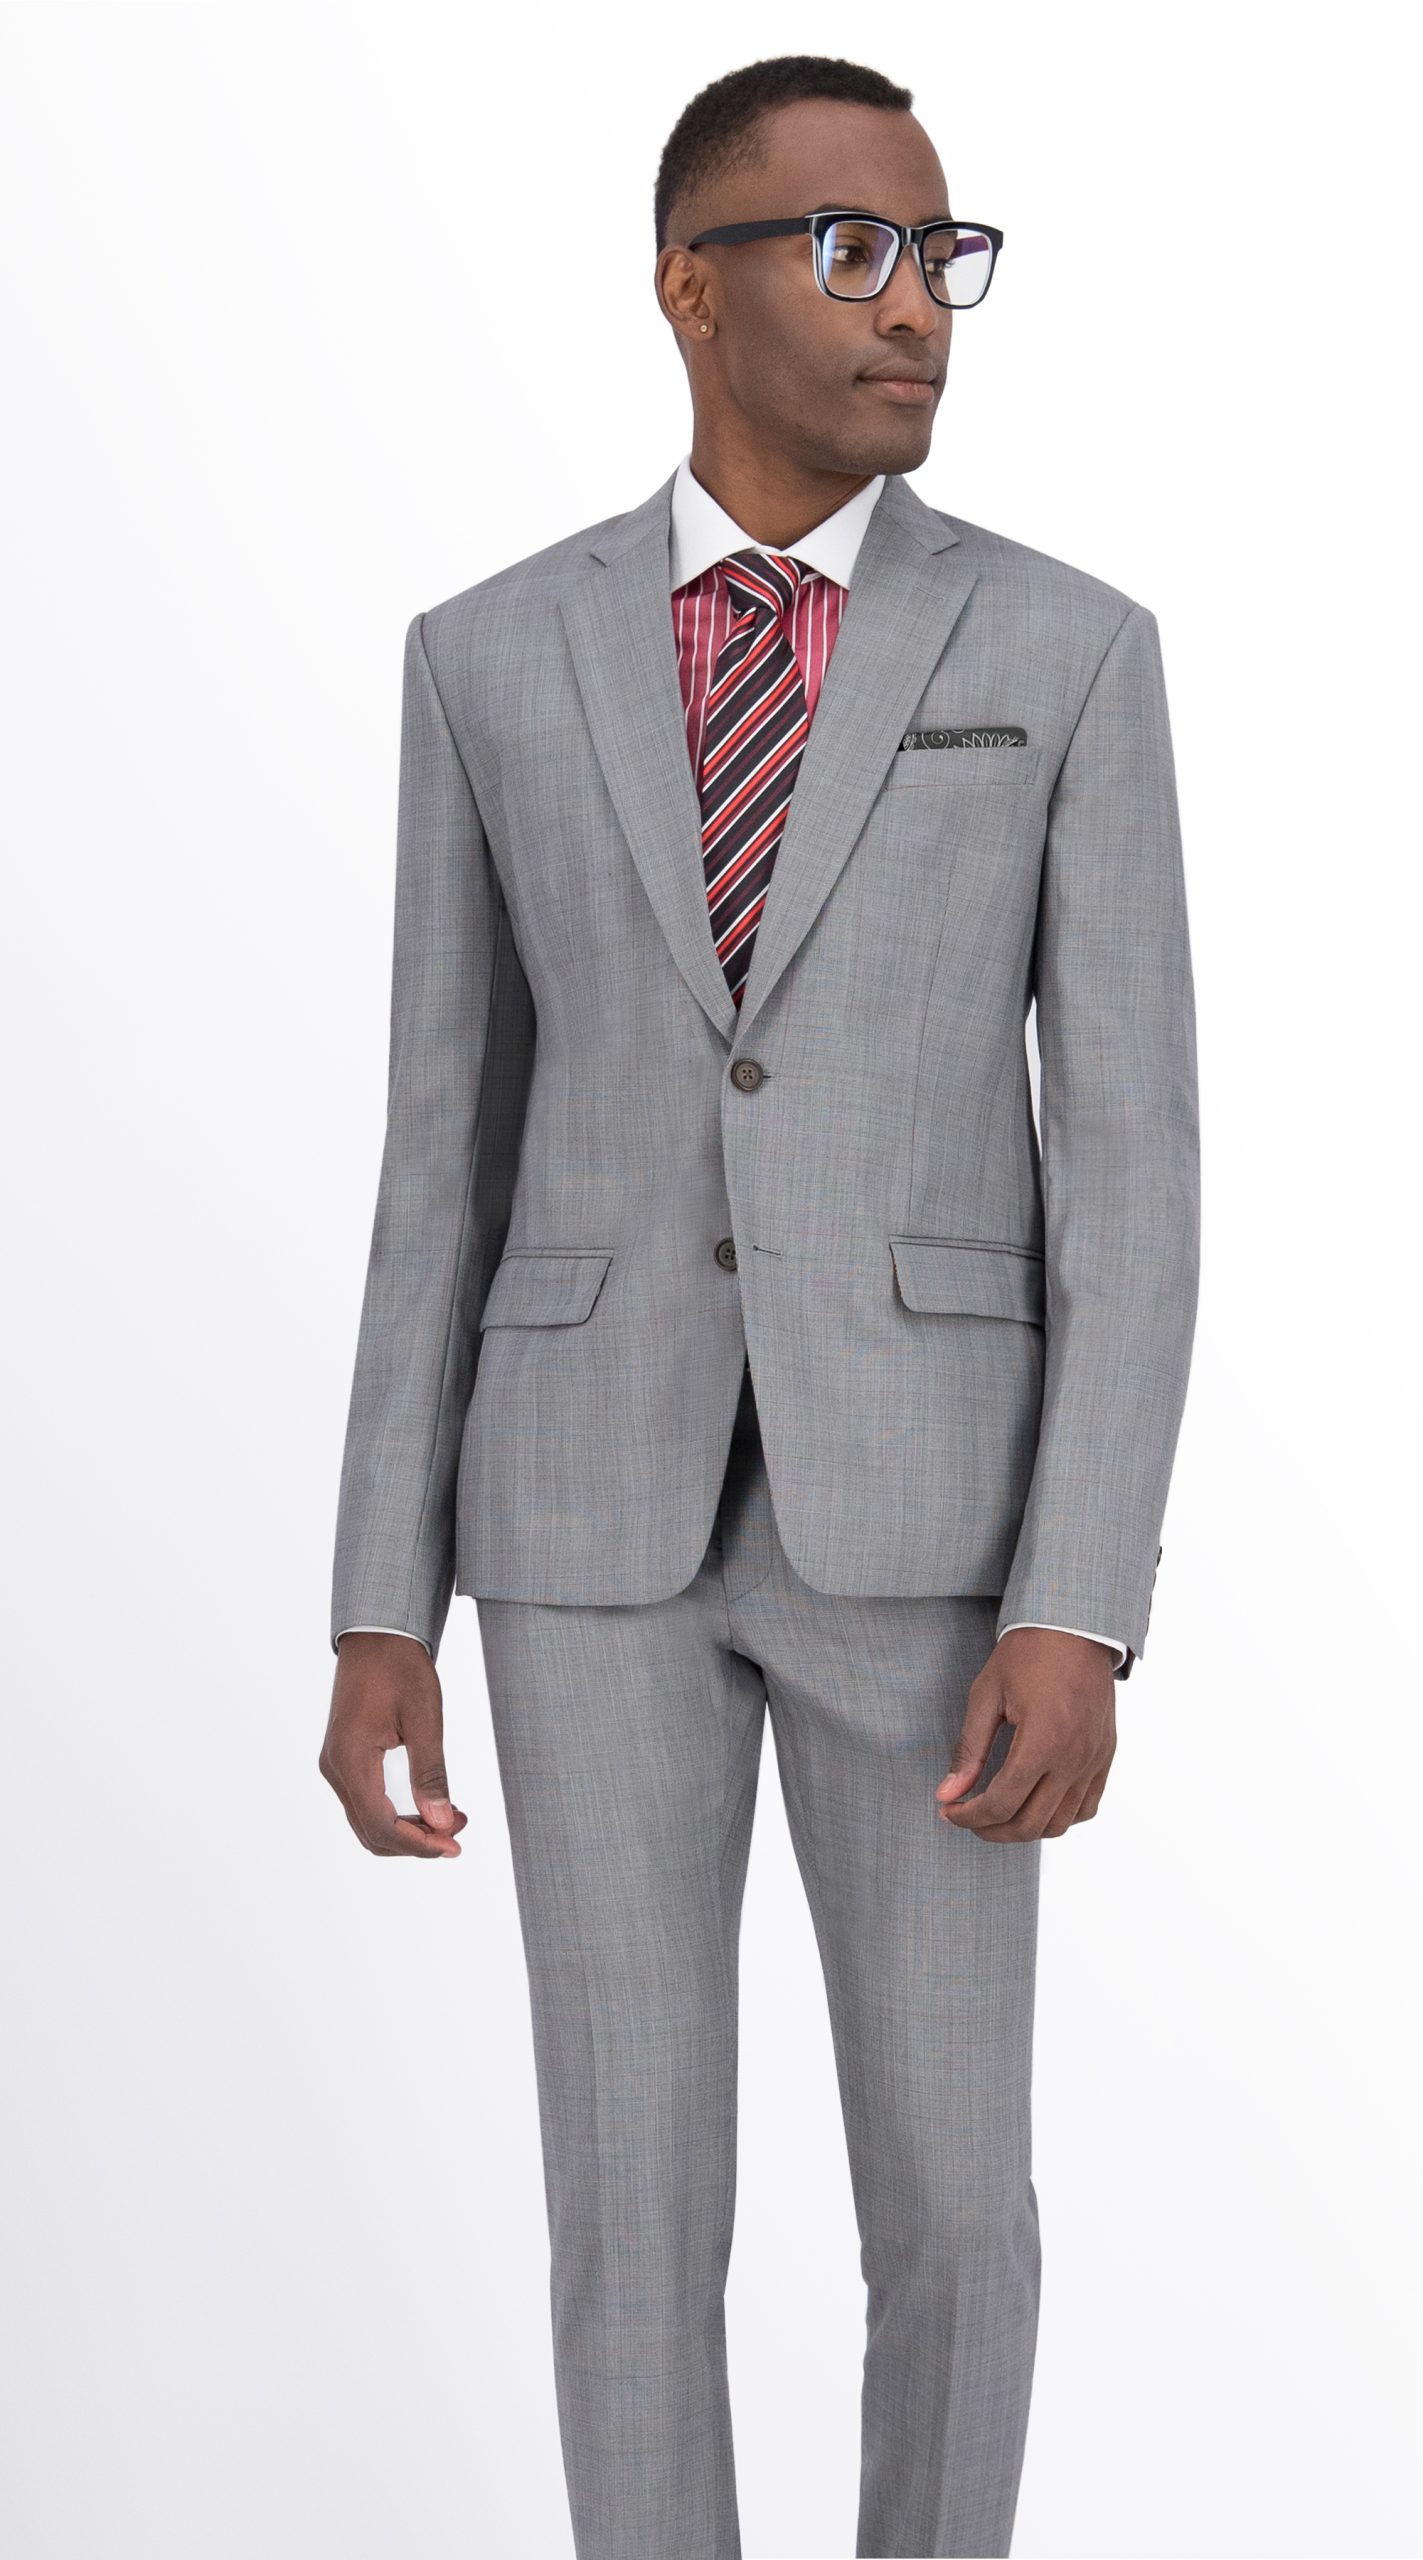 Top 5 Things to Look at When Buying a Business Suit – Bentex Suits